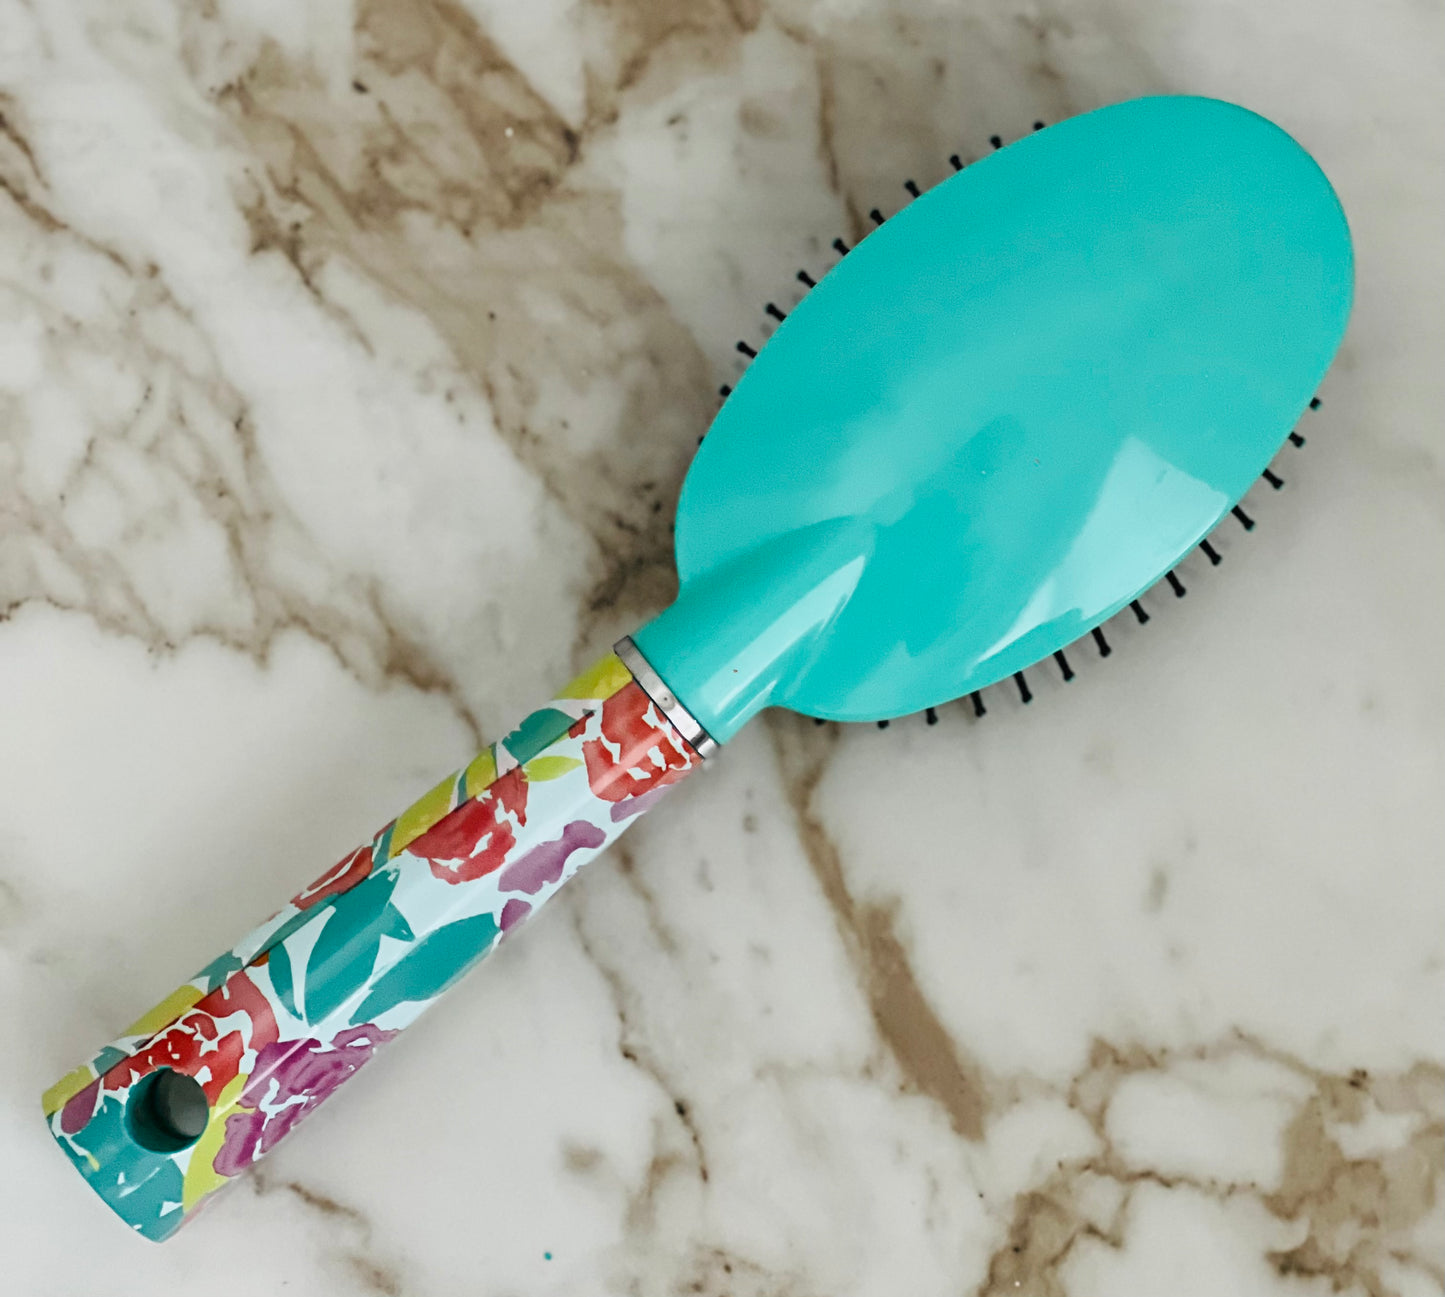 What's more beautiful than a floral brush? How about one that's personalized with your name! When you're searching for the perfect hairbrush, look no further than this custom personalized hair brush. This oval hairbrush is crafted with the highest quality materials and designed to last. We know you'll love using it every day - it feels amazing on your hair and leaves it looking voluminous and luxurious. Plus, with its chic floral design, it is also chic. Teal